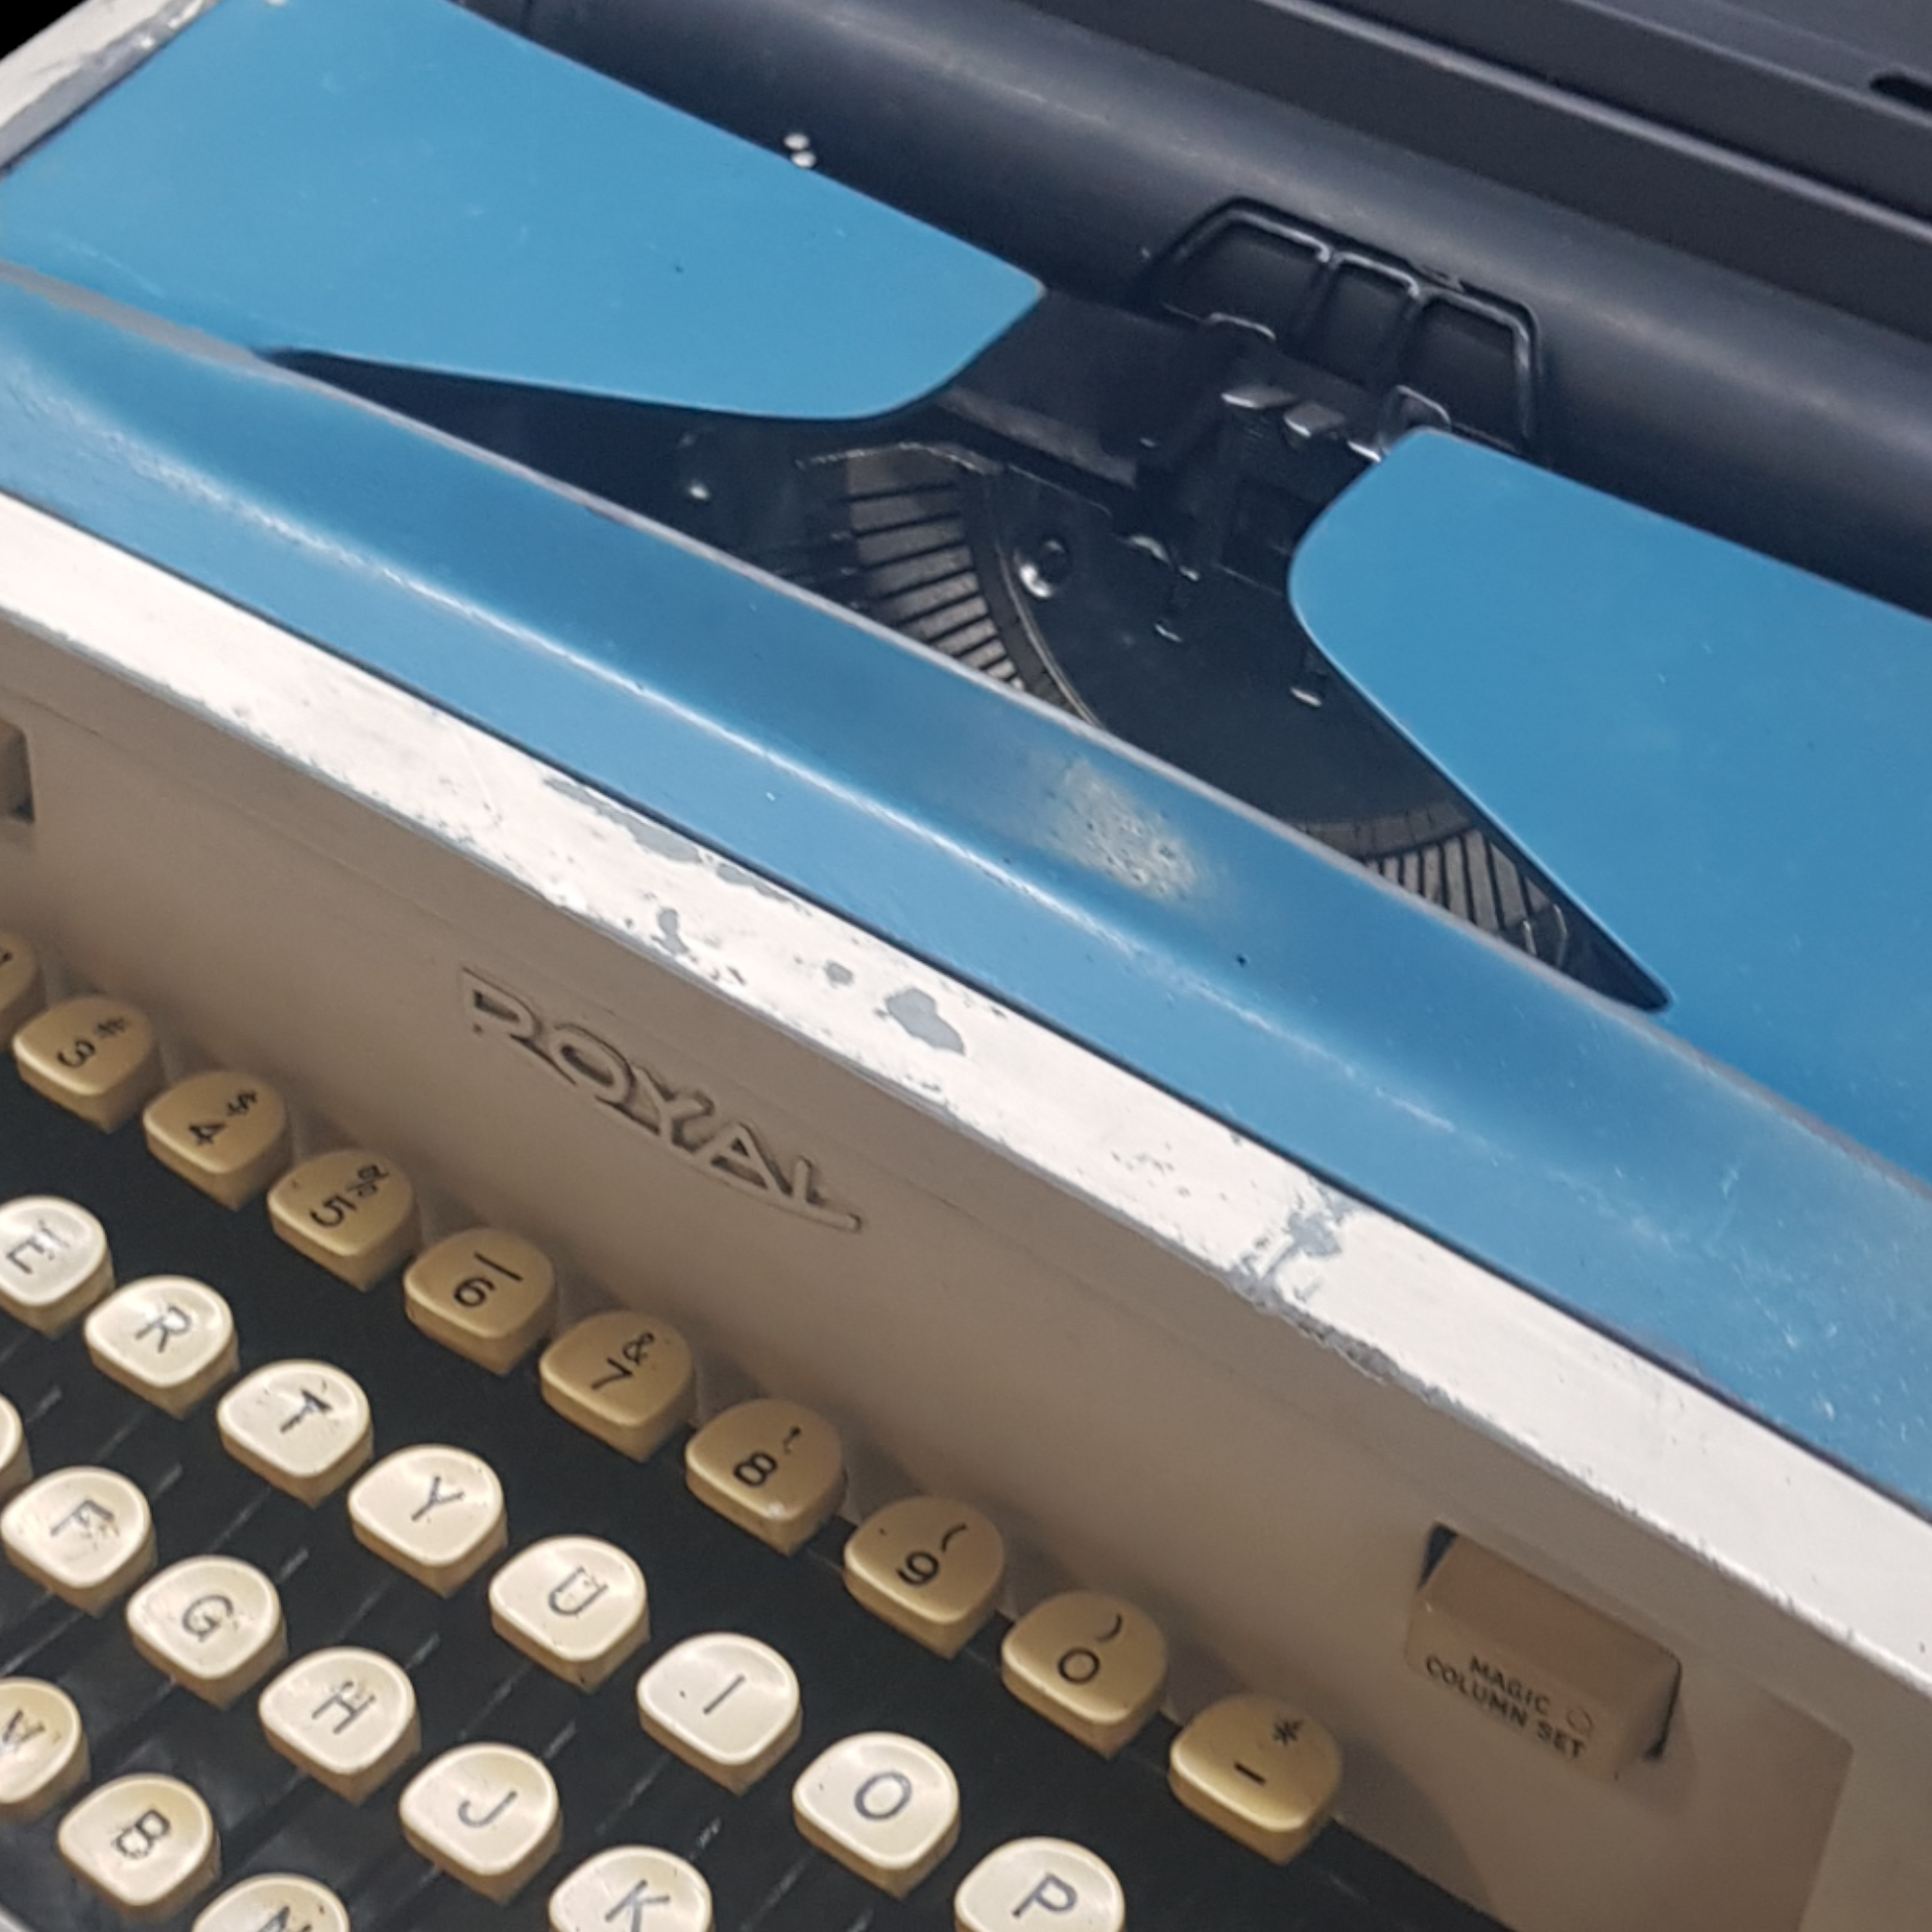 Image of Royal Safari Typewriter. A mid Size Rare Portable Typewriter. Made in the USA. Available from Universal Typewriter Company.